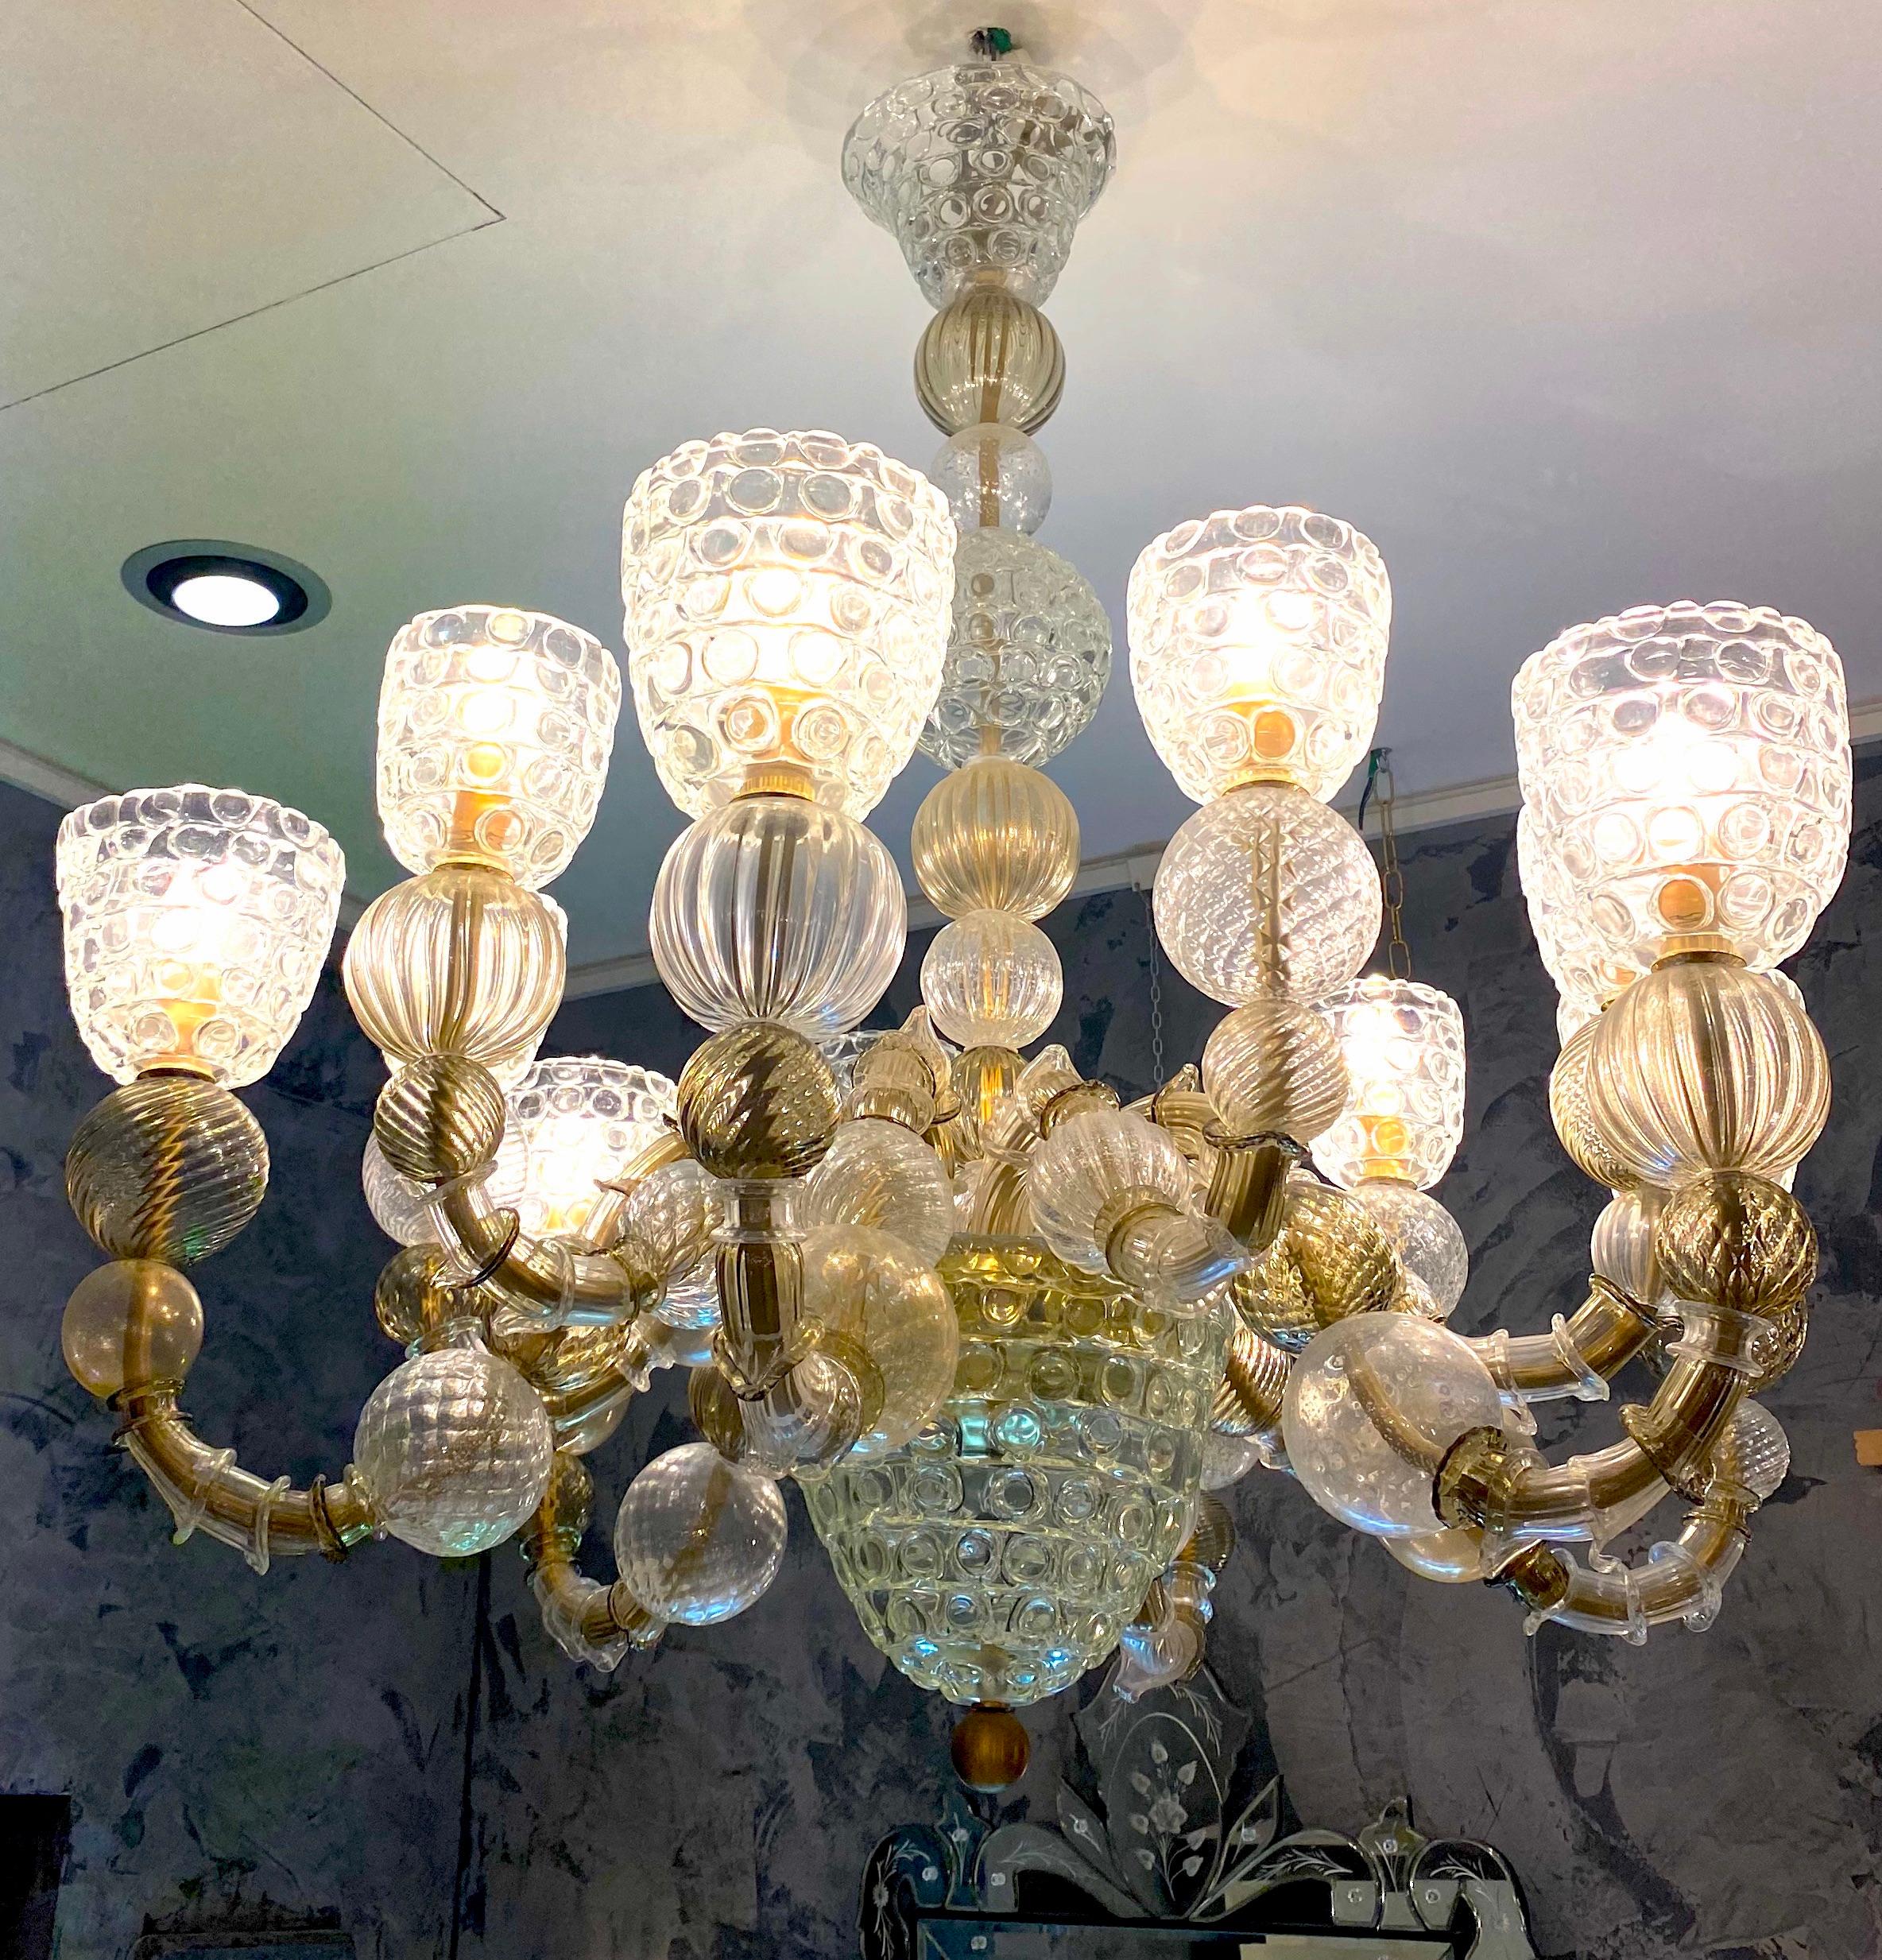 Magnificent chandelier with twelve arms, clear, fume and amber color with details gold inclusions. 
Venetian mouth blown and handcrafted by master artisans in Murano.
Composed of are characterized by a lavish central body with round-shape elements